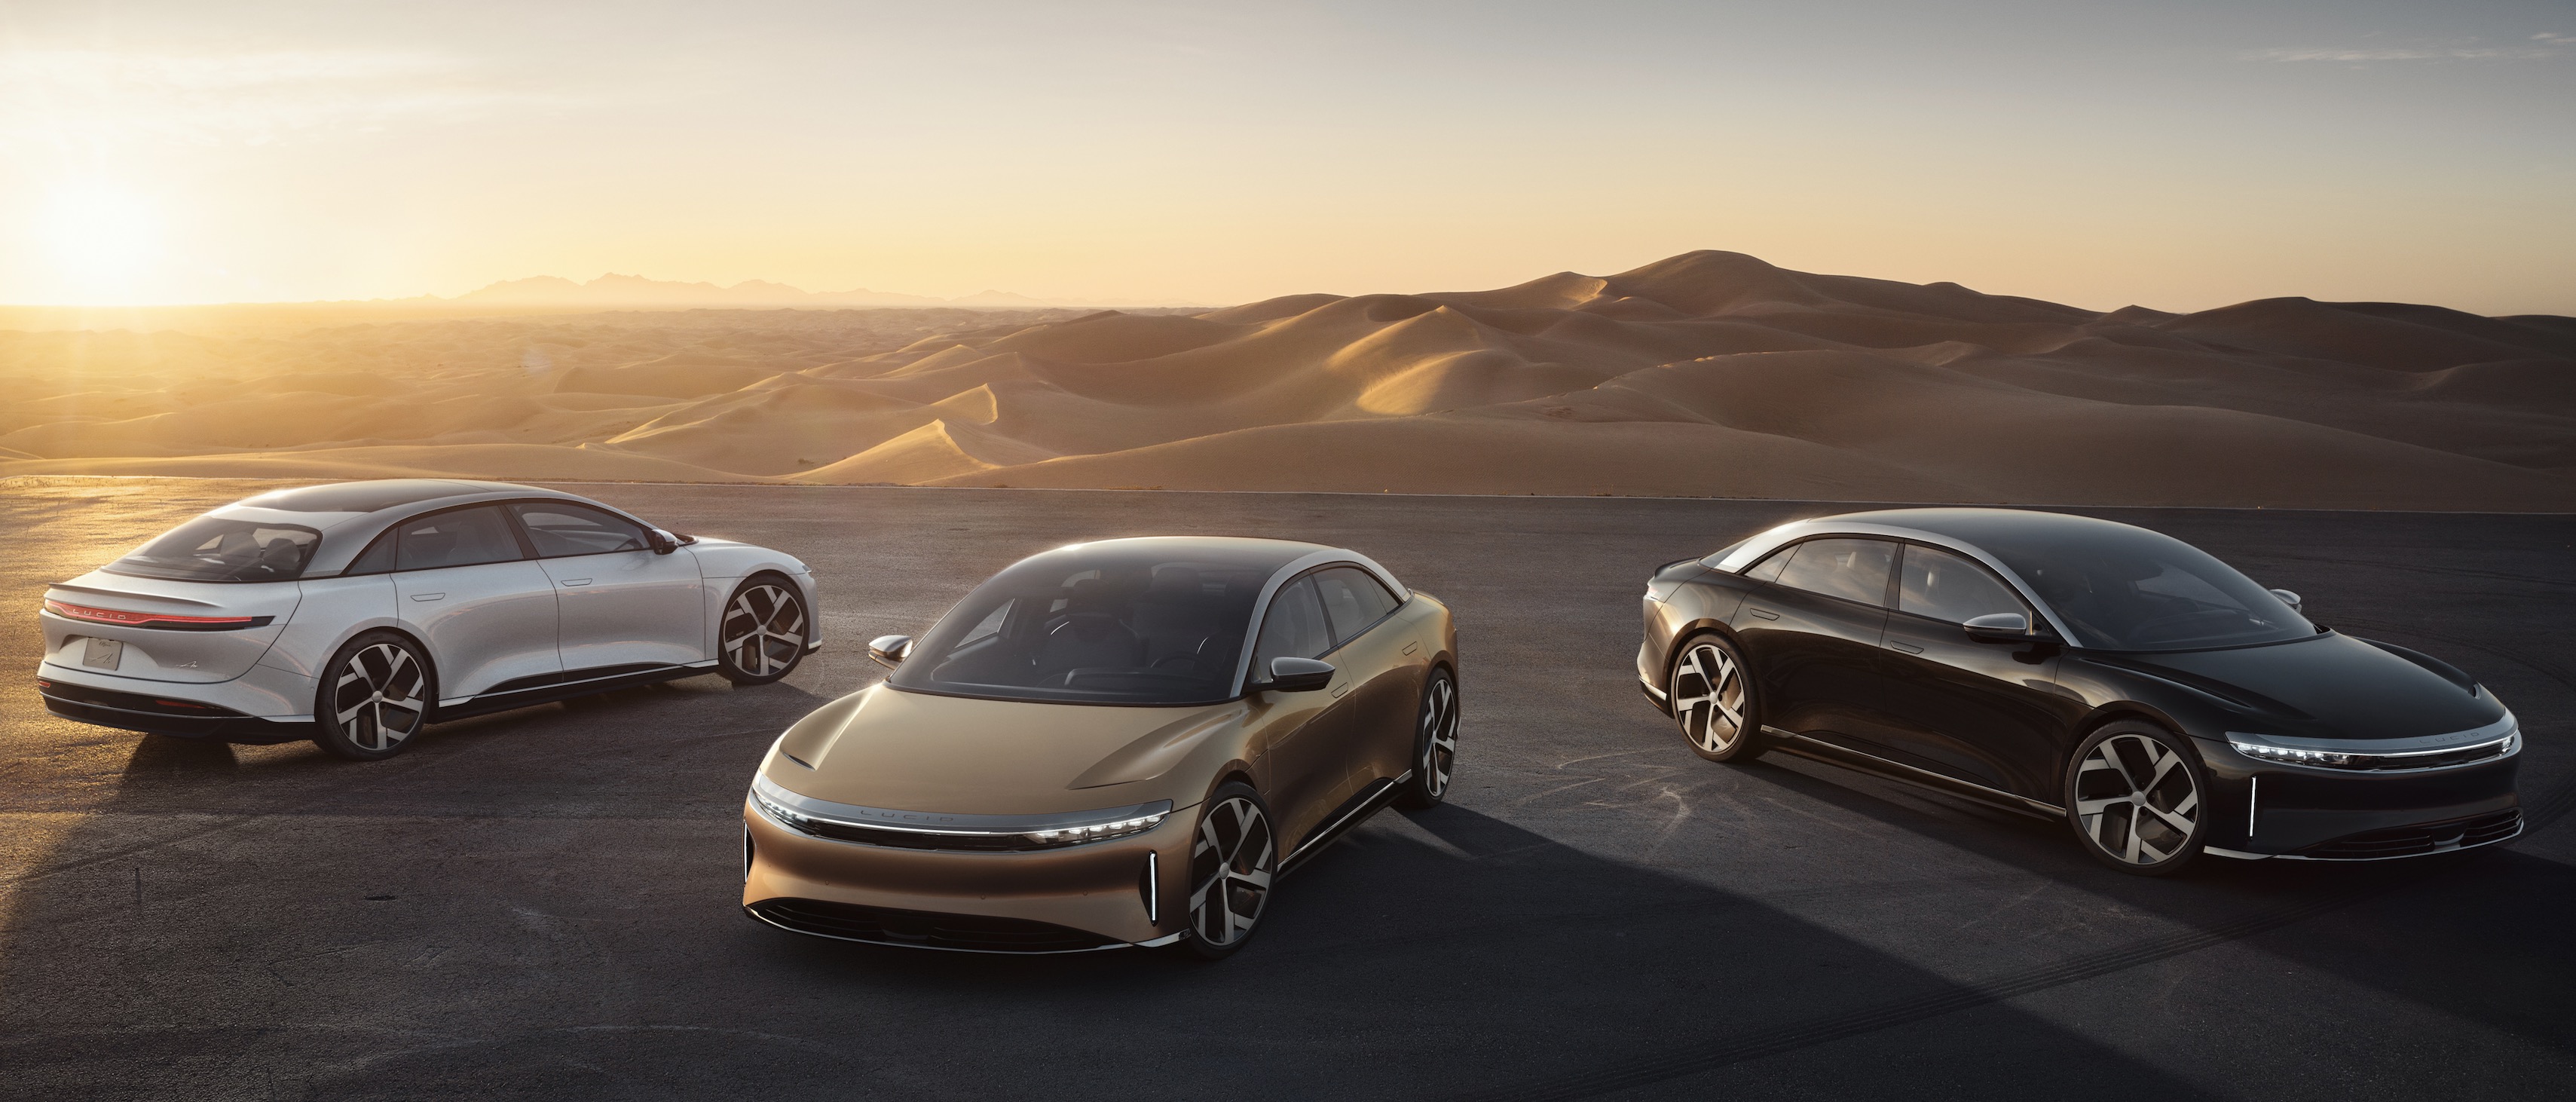 Lucid launches Air electric sedan, unveils production design and full specs